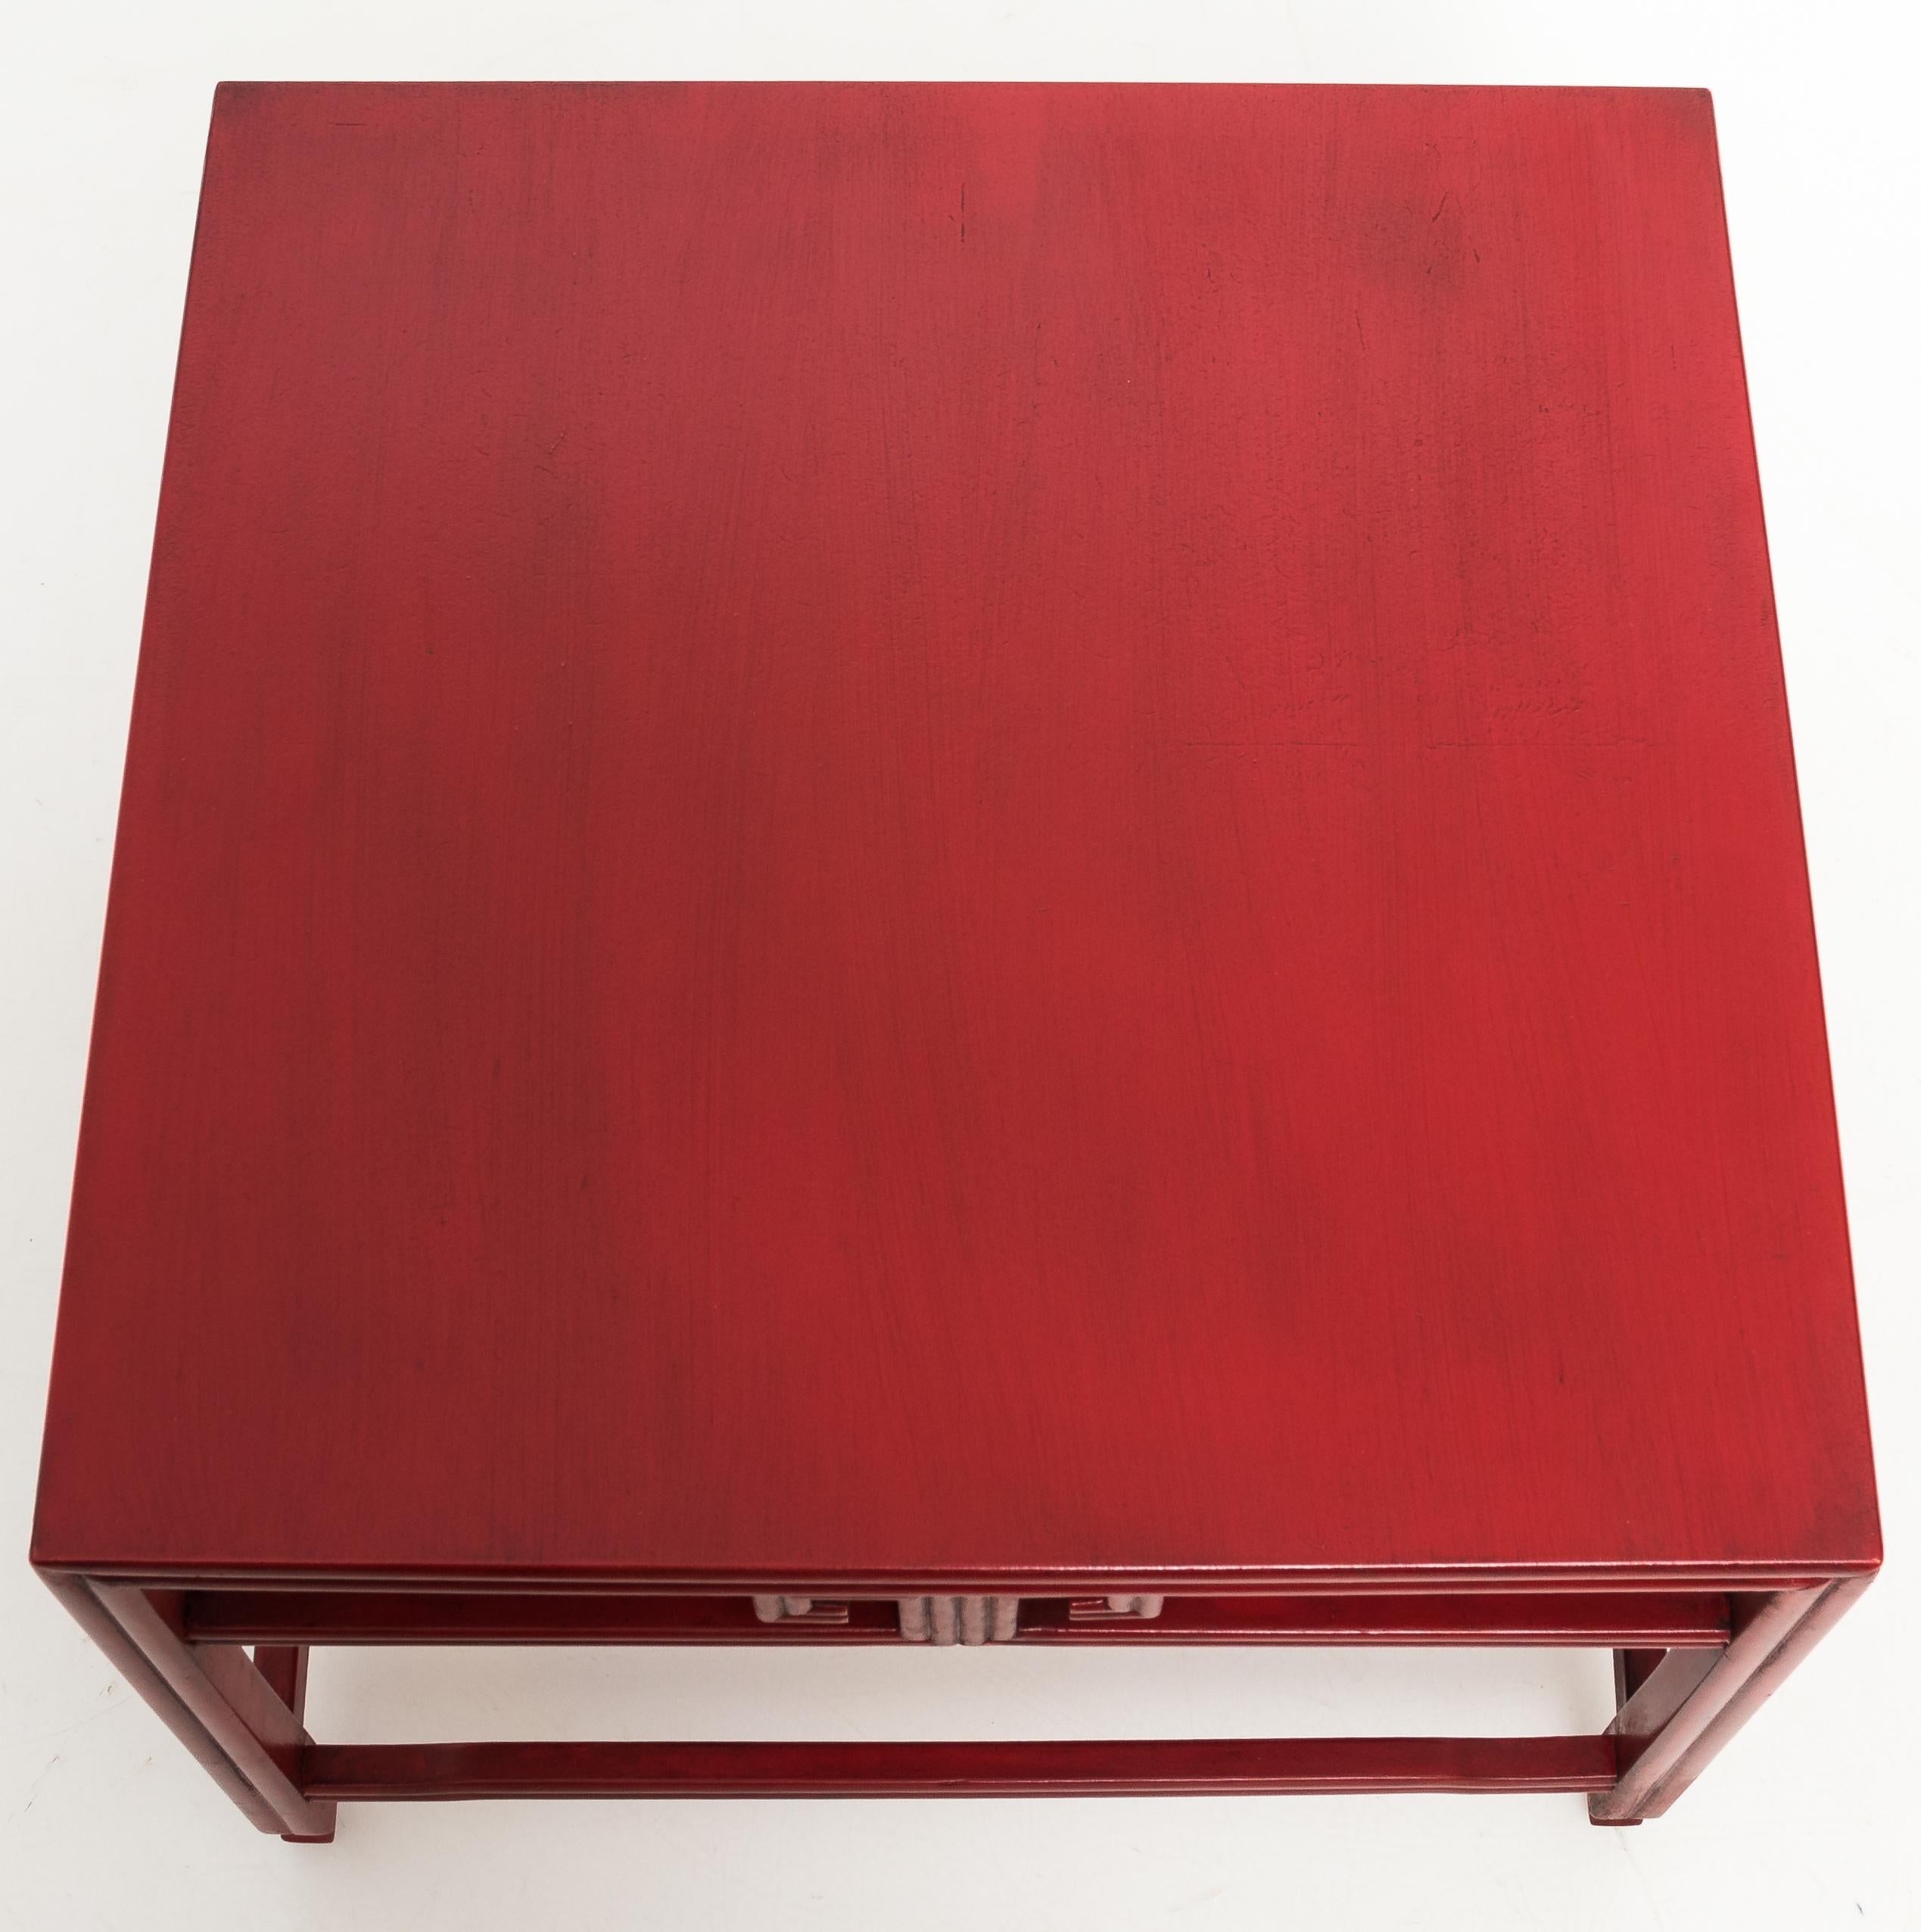 1970s occasional table by Michael Taylor for Baker. From the Far East collection. Solid oak construction with Greek key detailing. Newly refinished in antique red faux painted finish. Table retains Baker metal label.